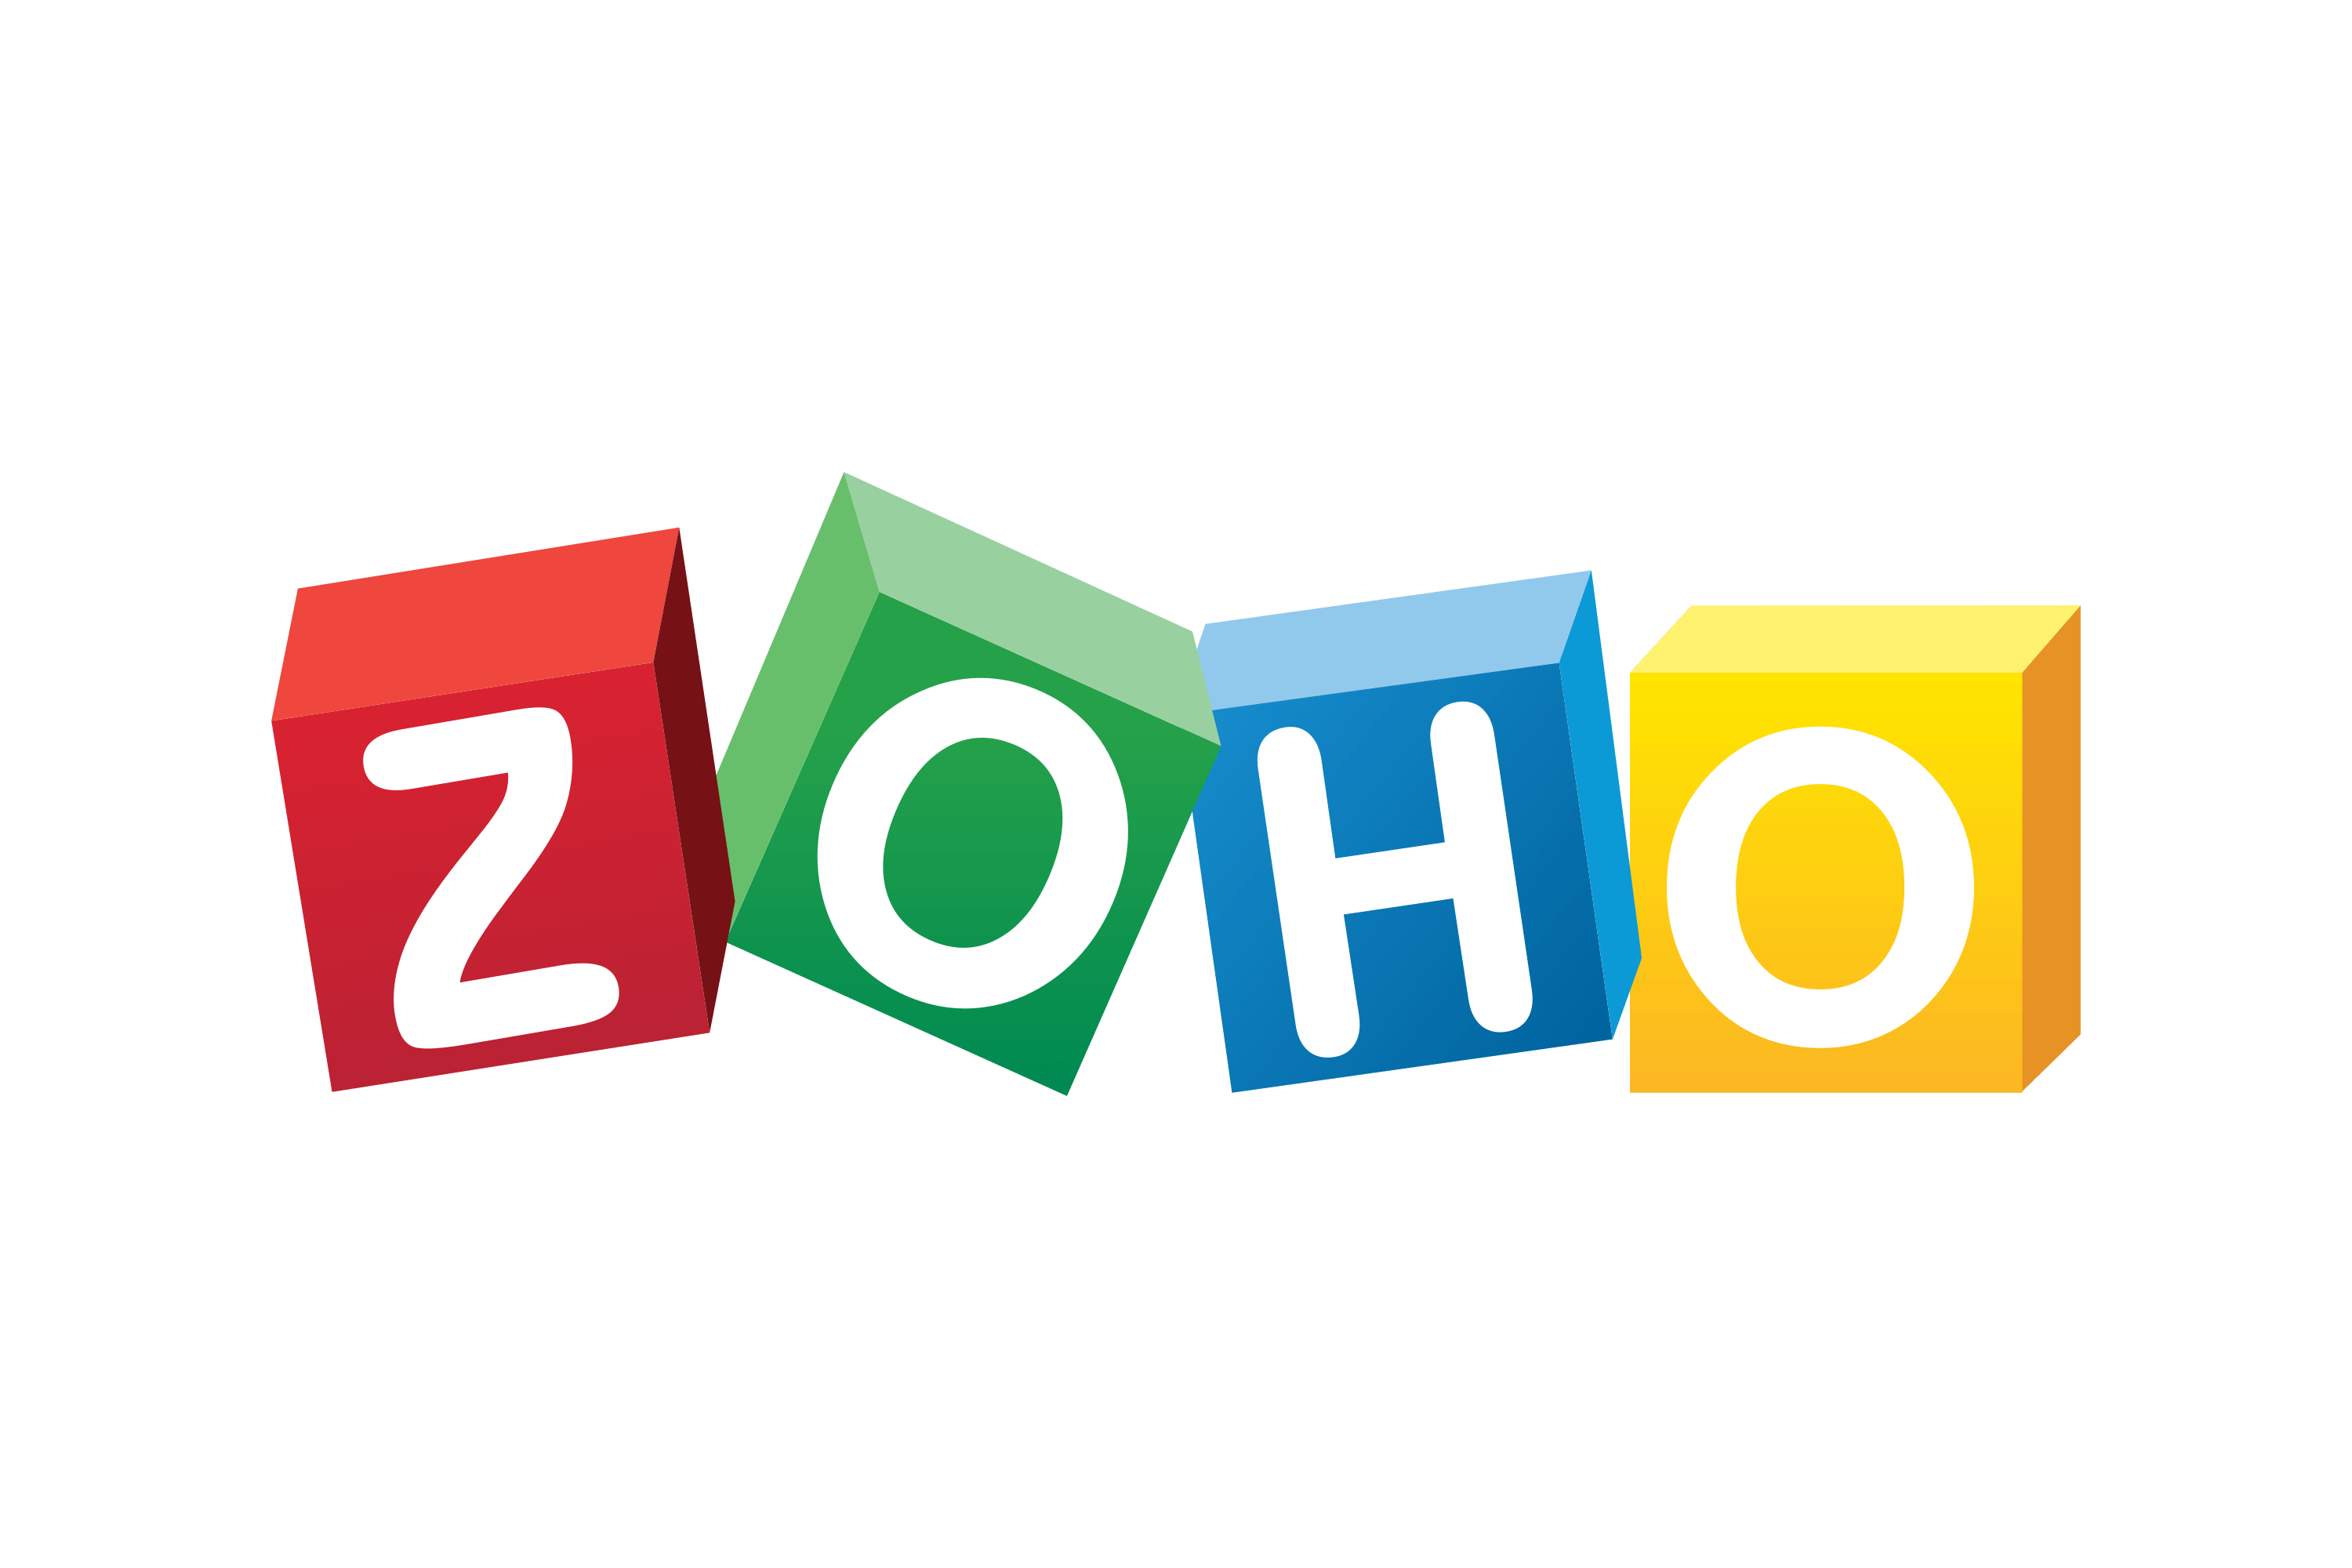 Zoho Office Suite Logo.